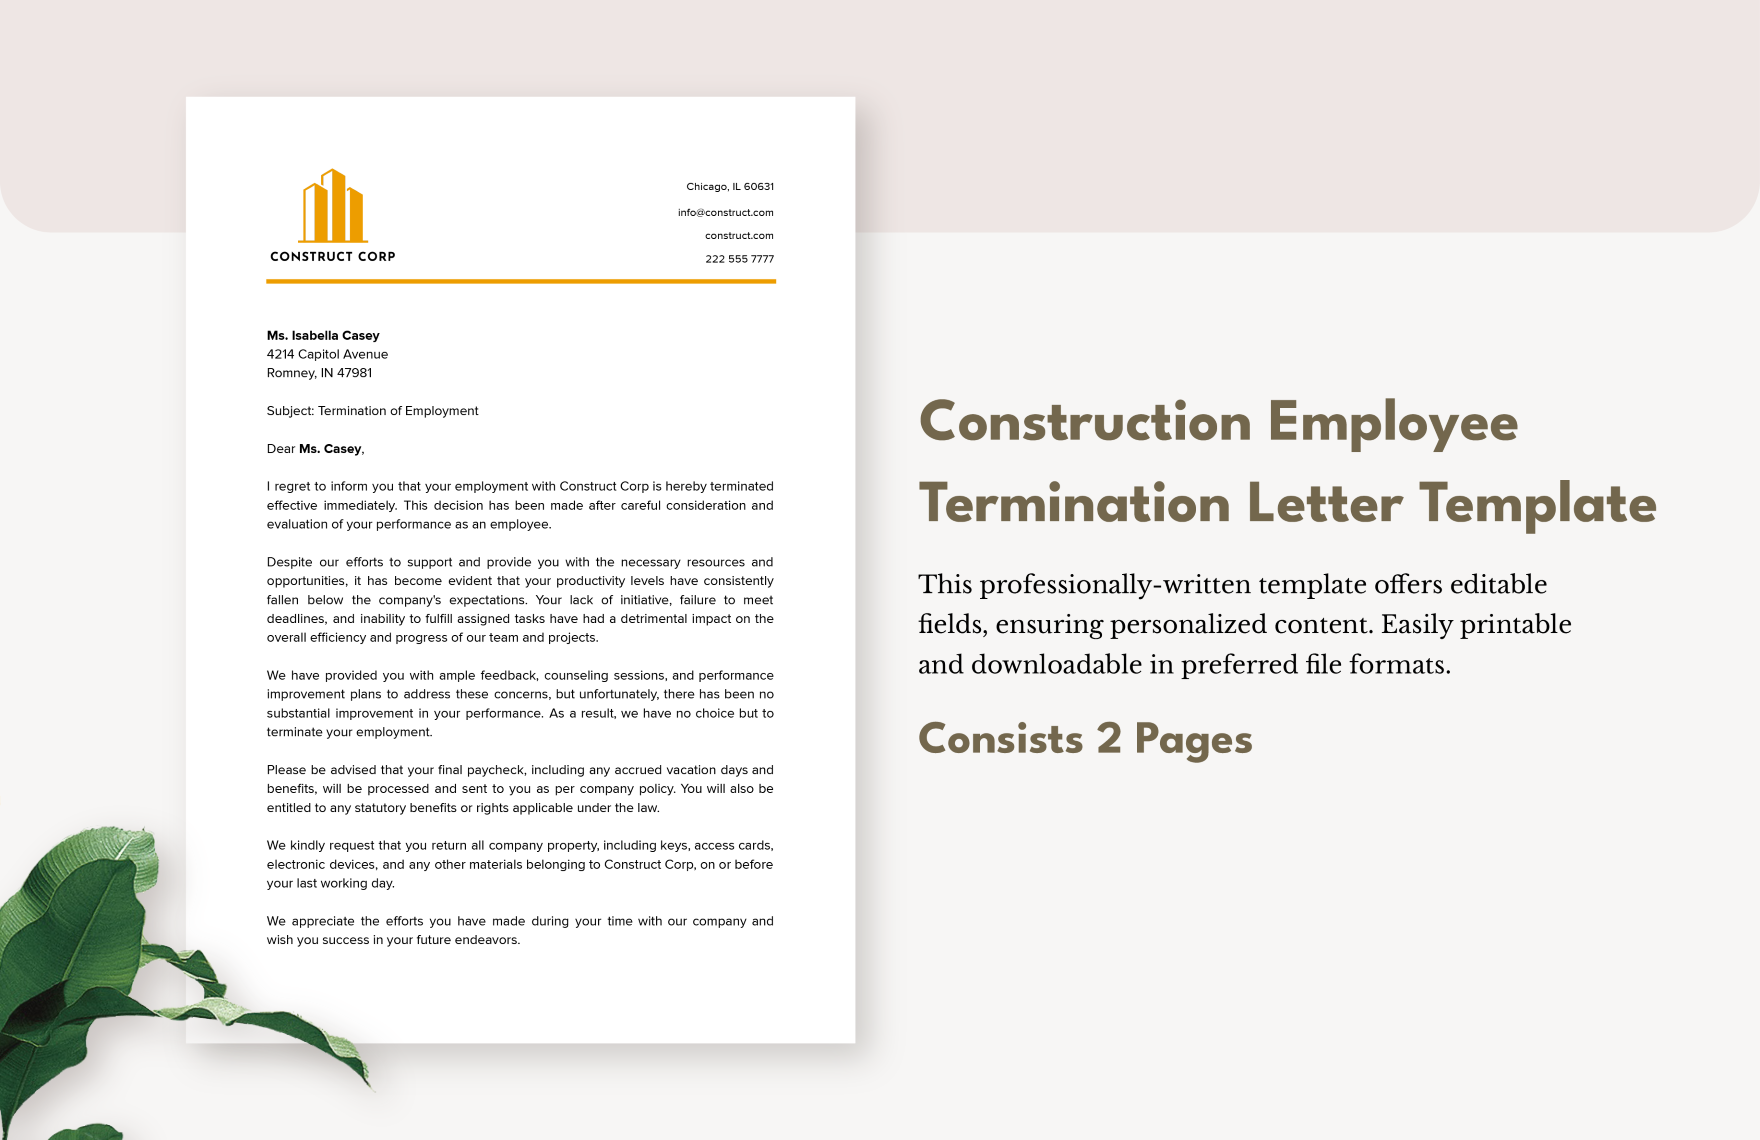 Construction Employee Termination Letter Template